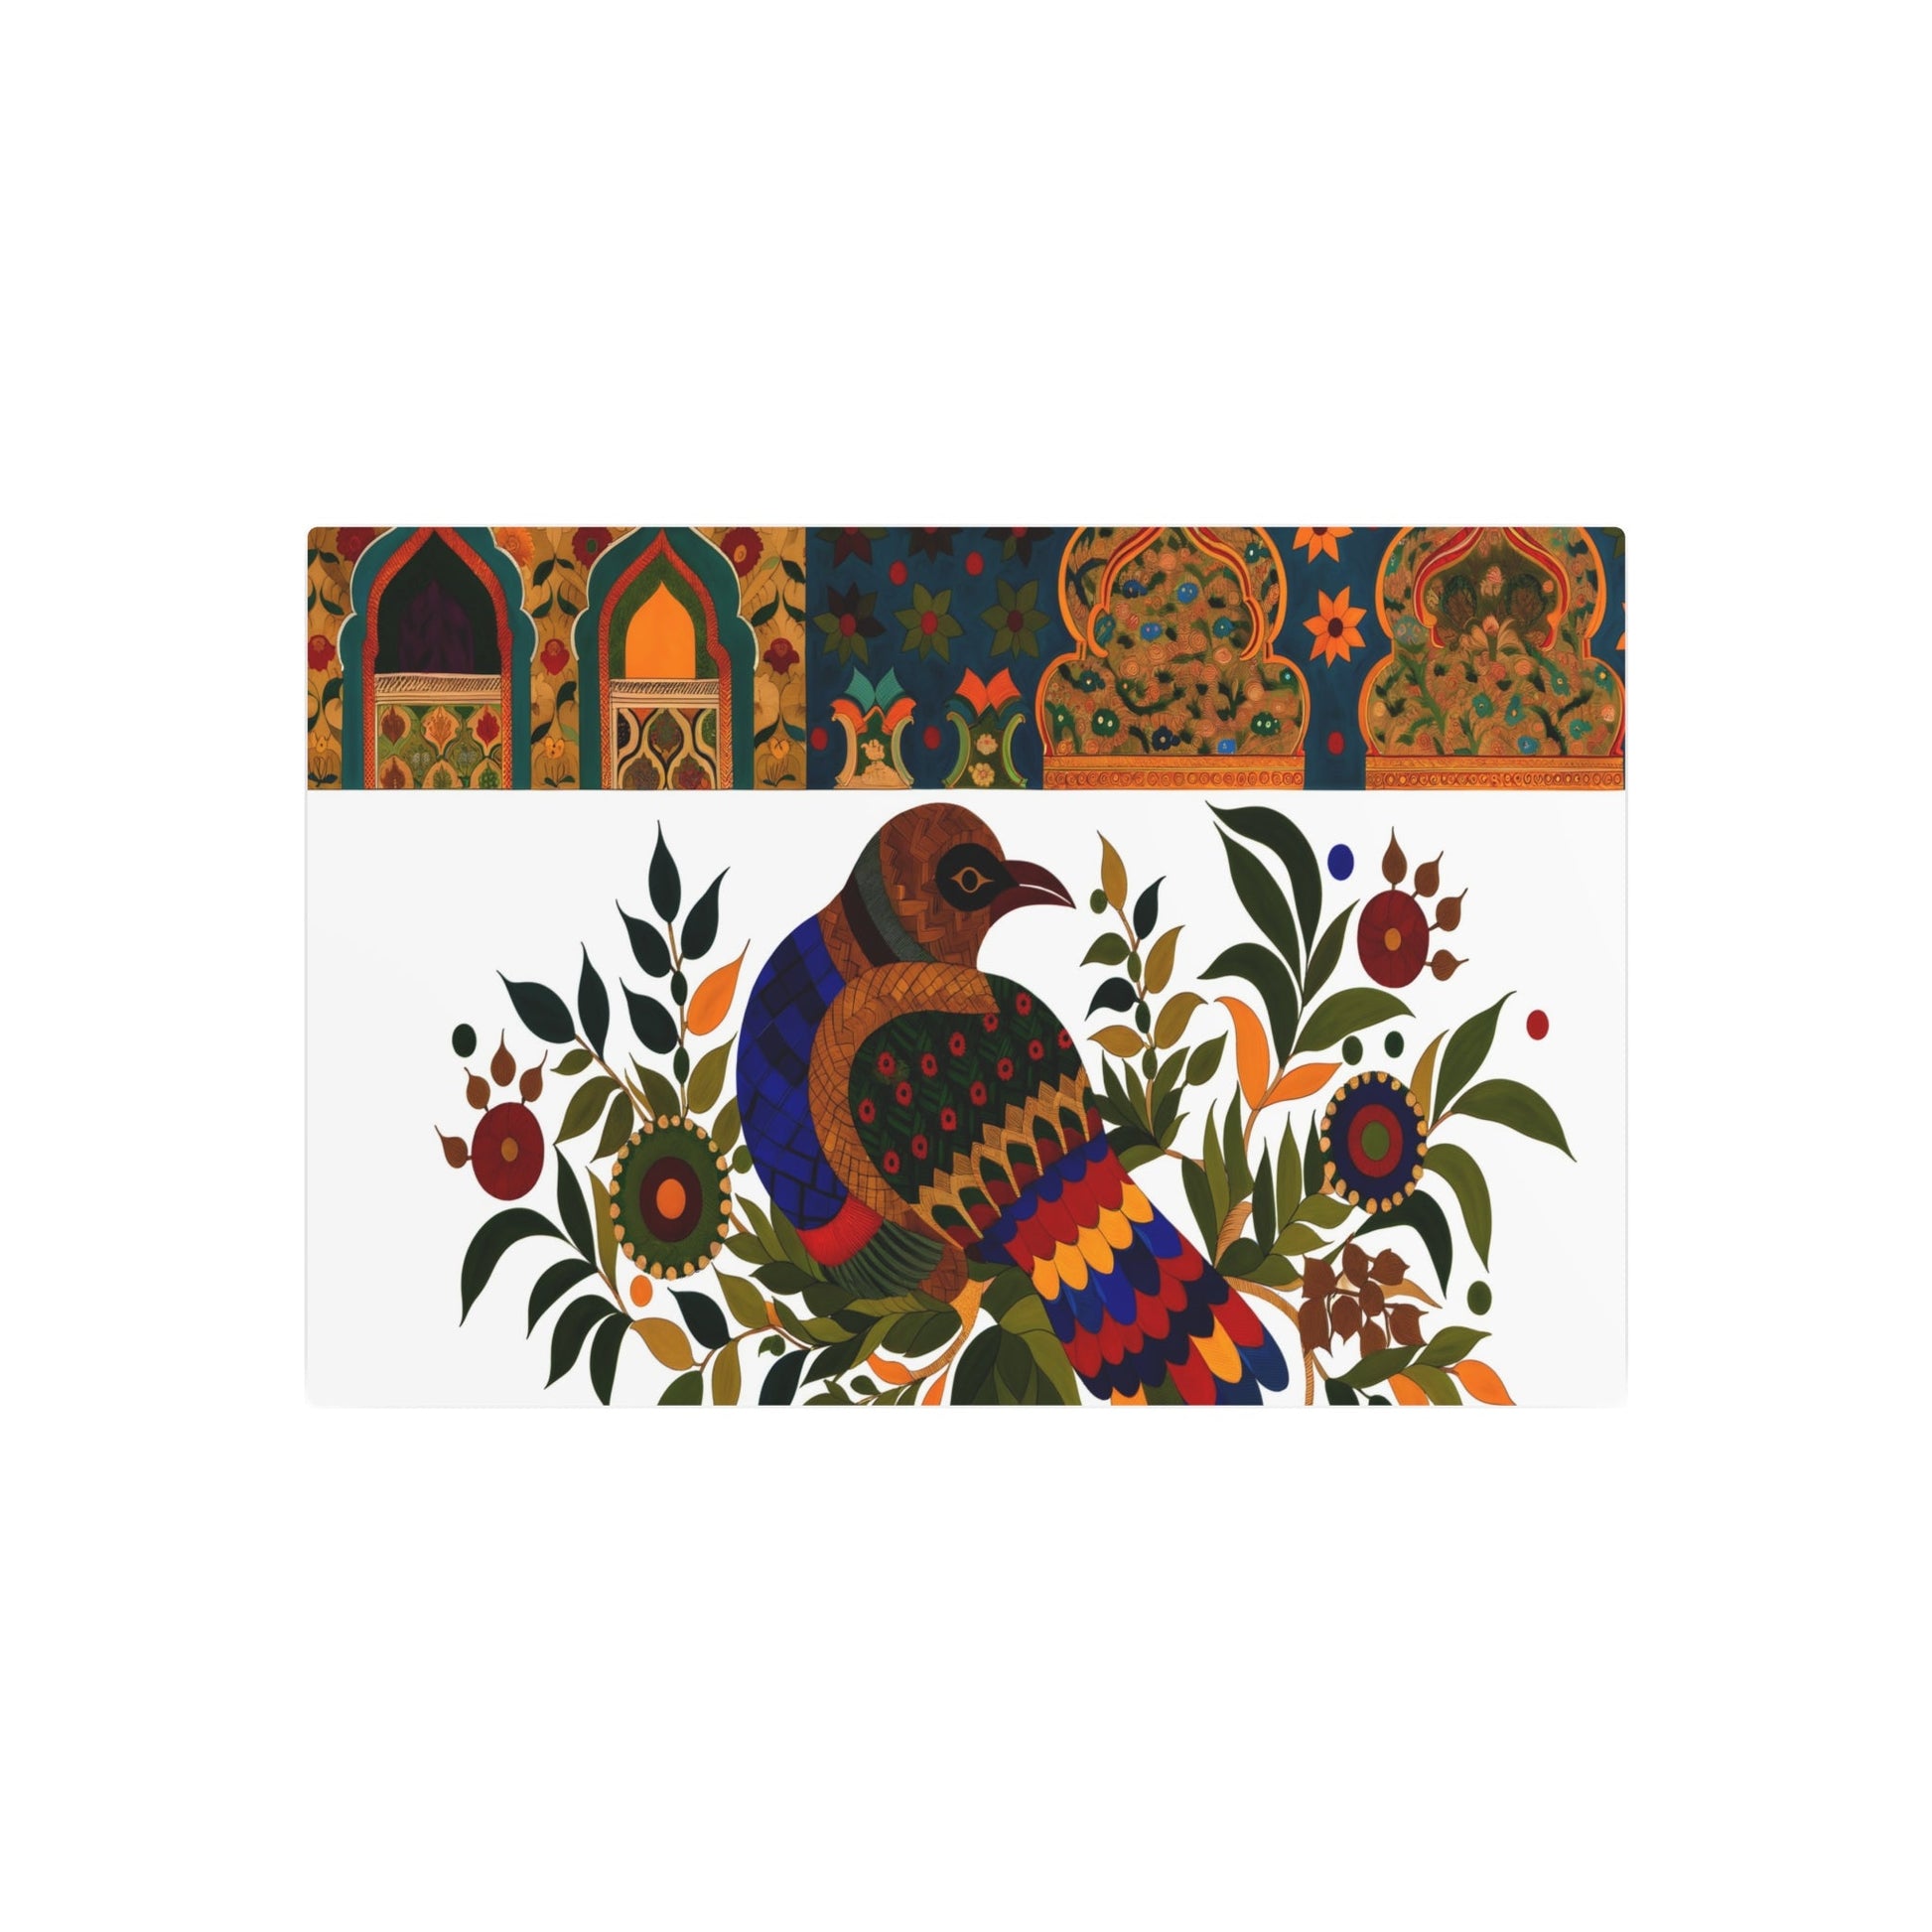 Metal Poster Art | "Mughal Miniature South Asian Art - Vibrant Bird-Centric Painting with Ornate Patterns and Architectural Details Reflecting Mughal Era Op - Metal Poster Art 30″ x 20″ (Horizontal) 0.12''